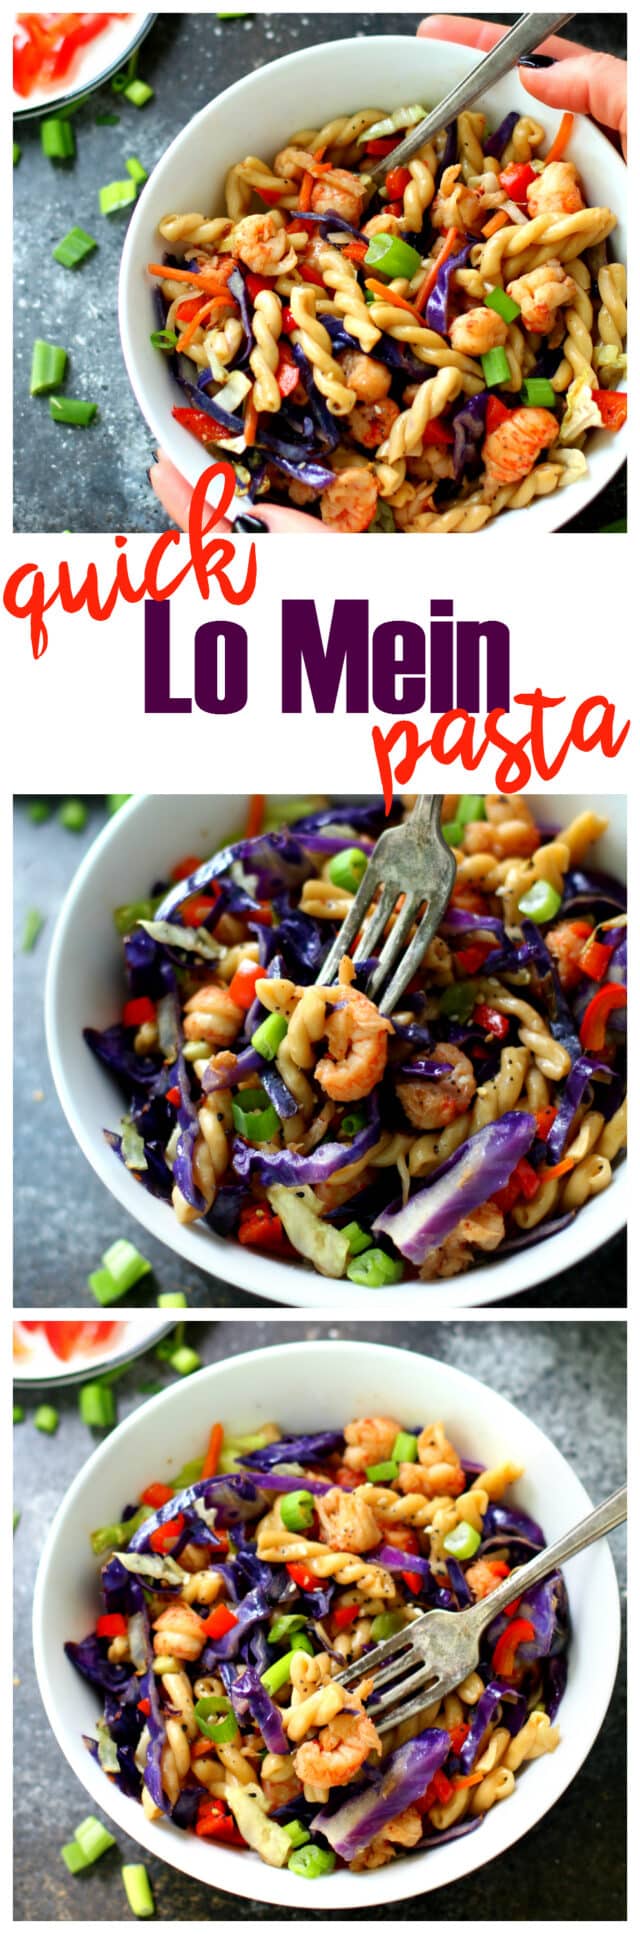 The easiest lo mein you will ever make in 15 min from start to finish. And it’s so much quicker, tastier and healthier than take-out!